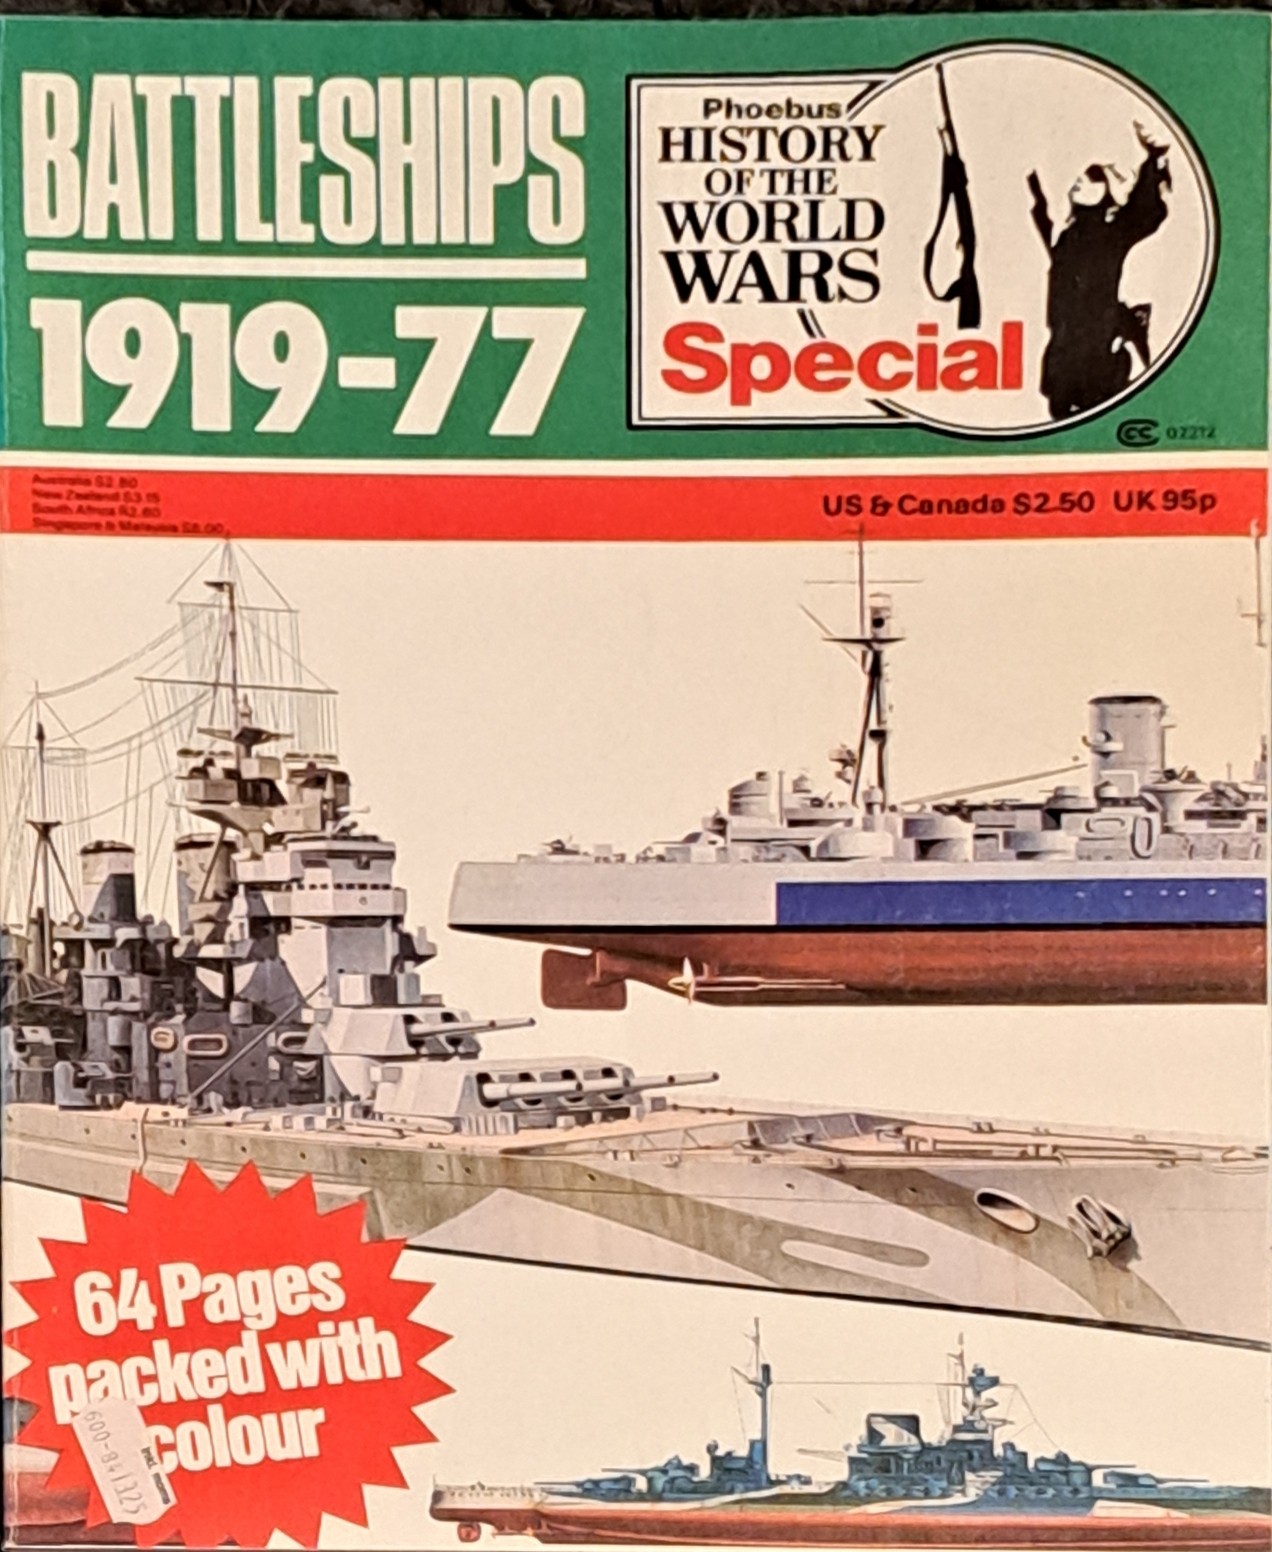 Battleships 1919-1977 - Purnells History of the World Wars Special